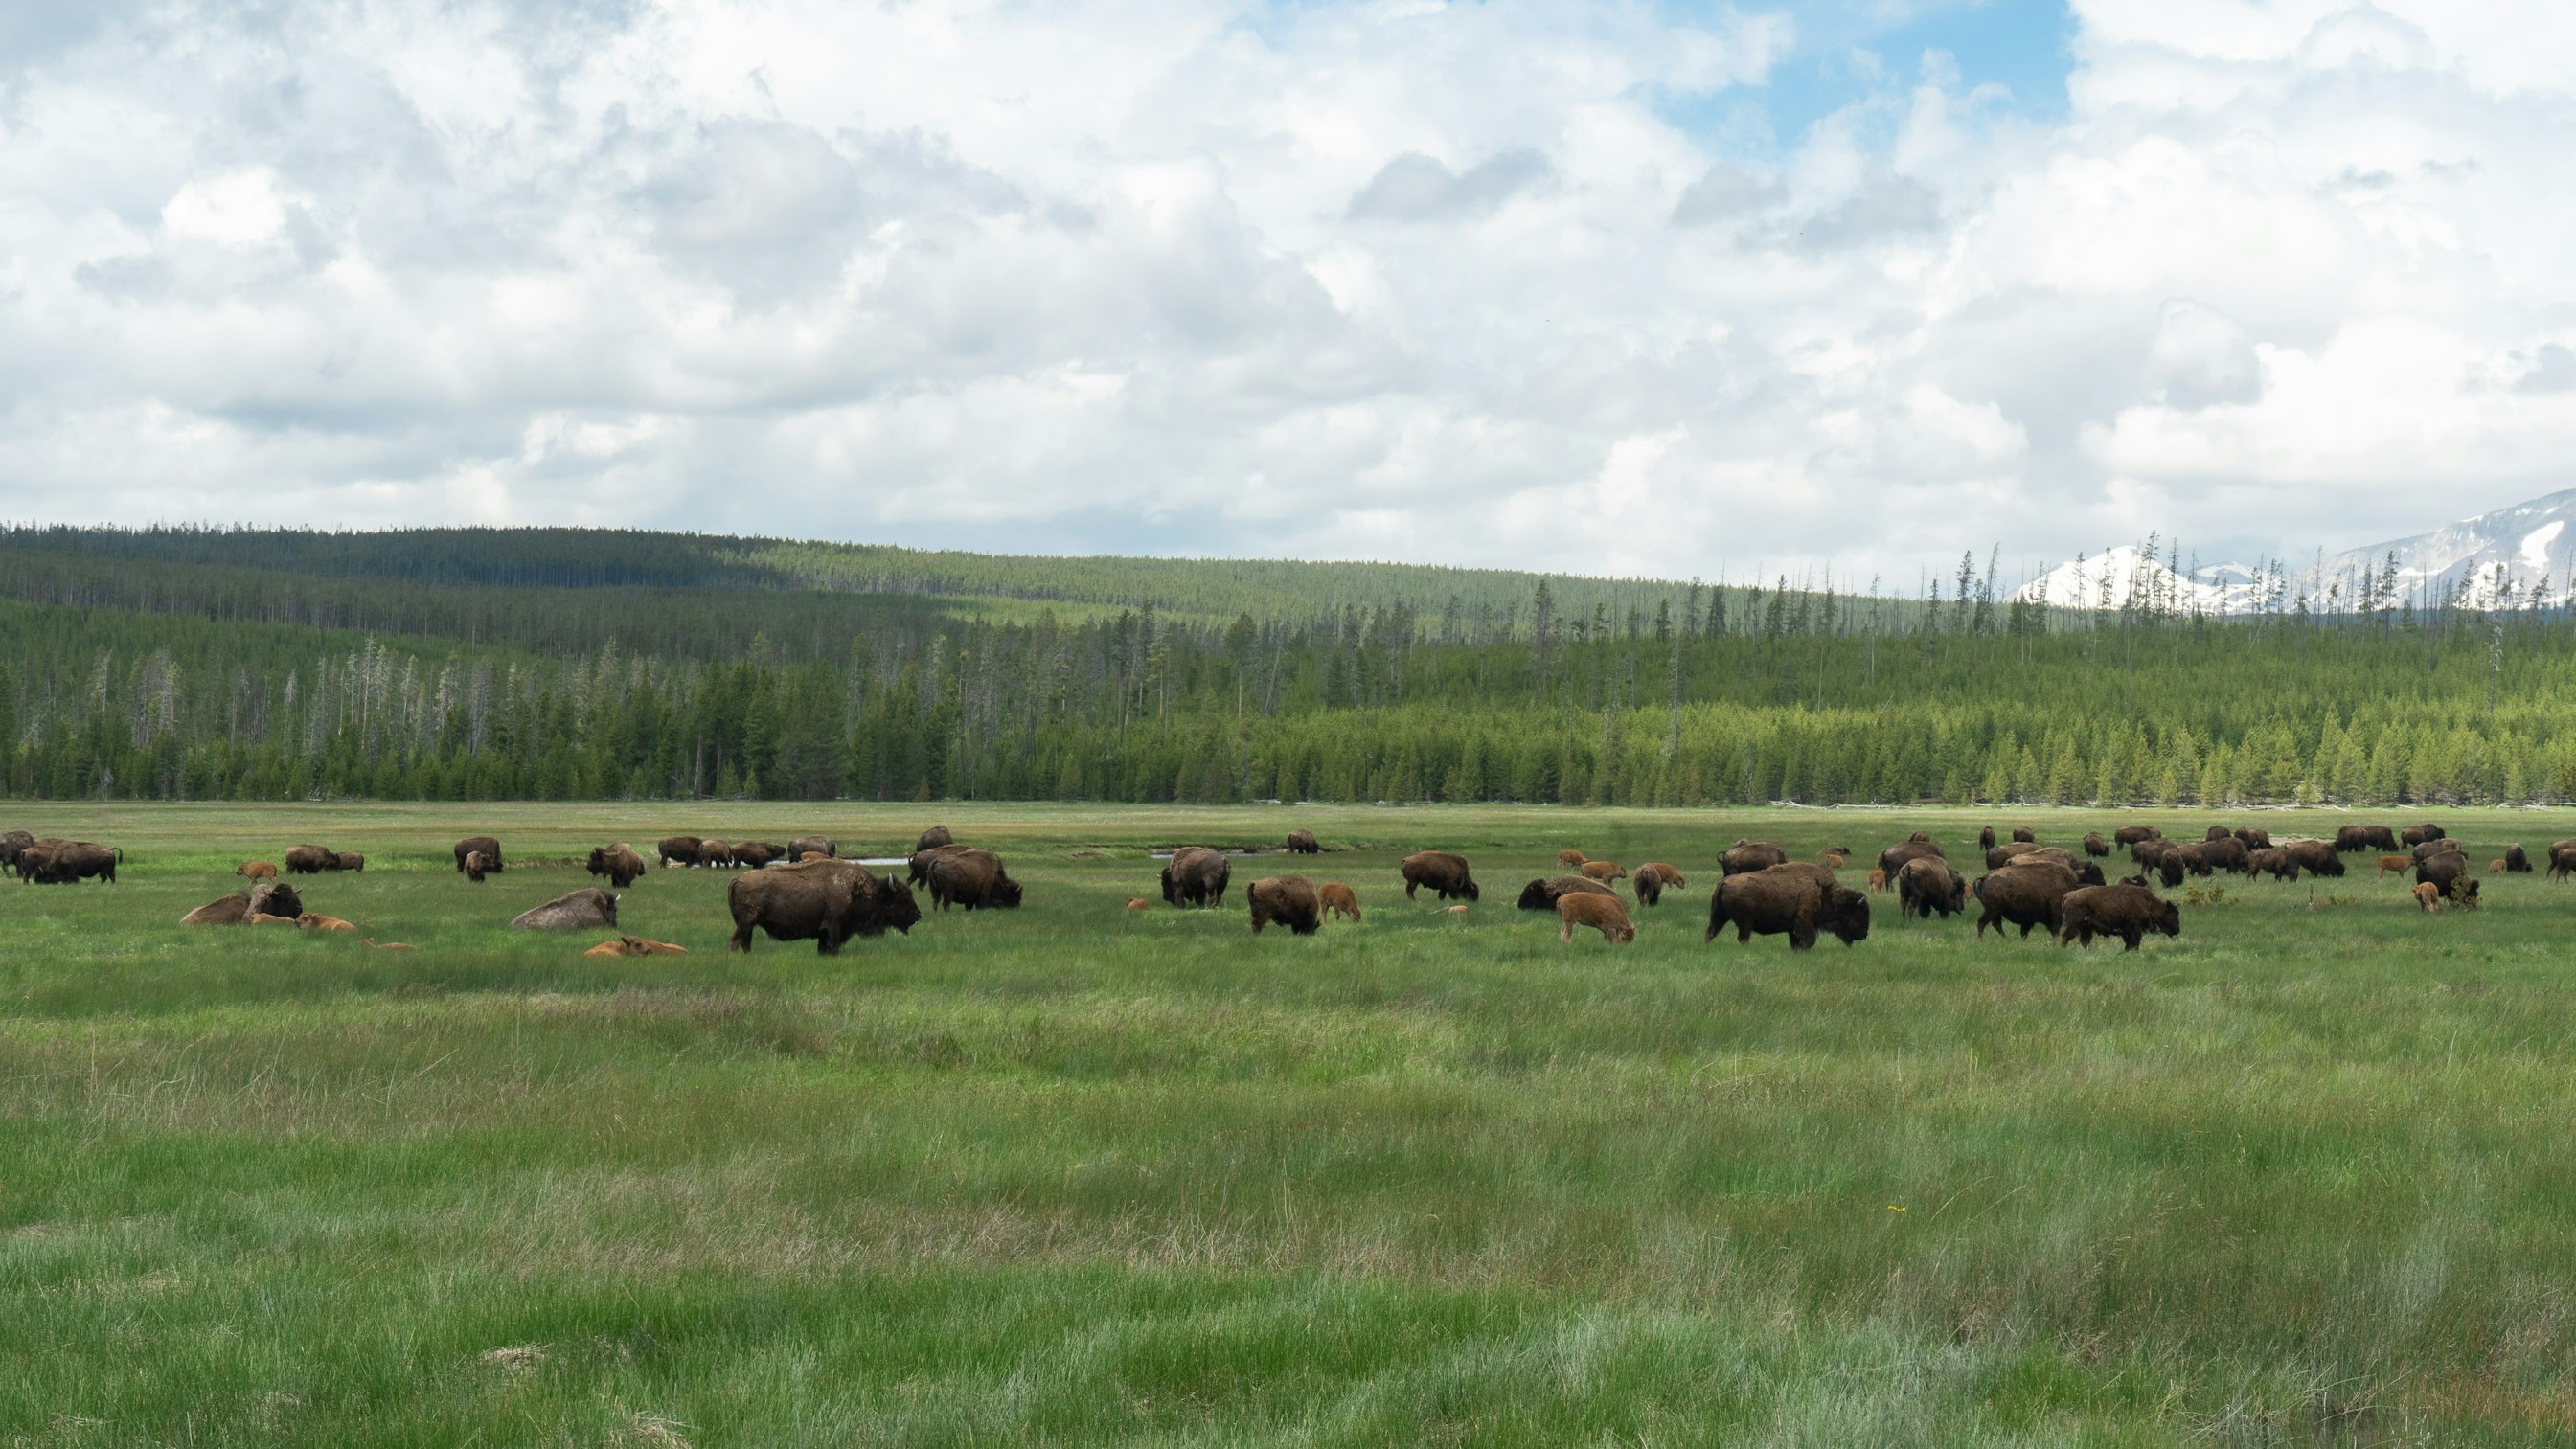 Challenges For Rotational Grazing Practice: Views From Non-Adopters Across the Great Plains, USA